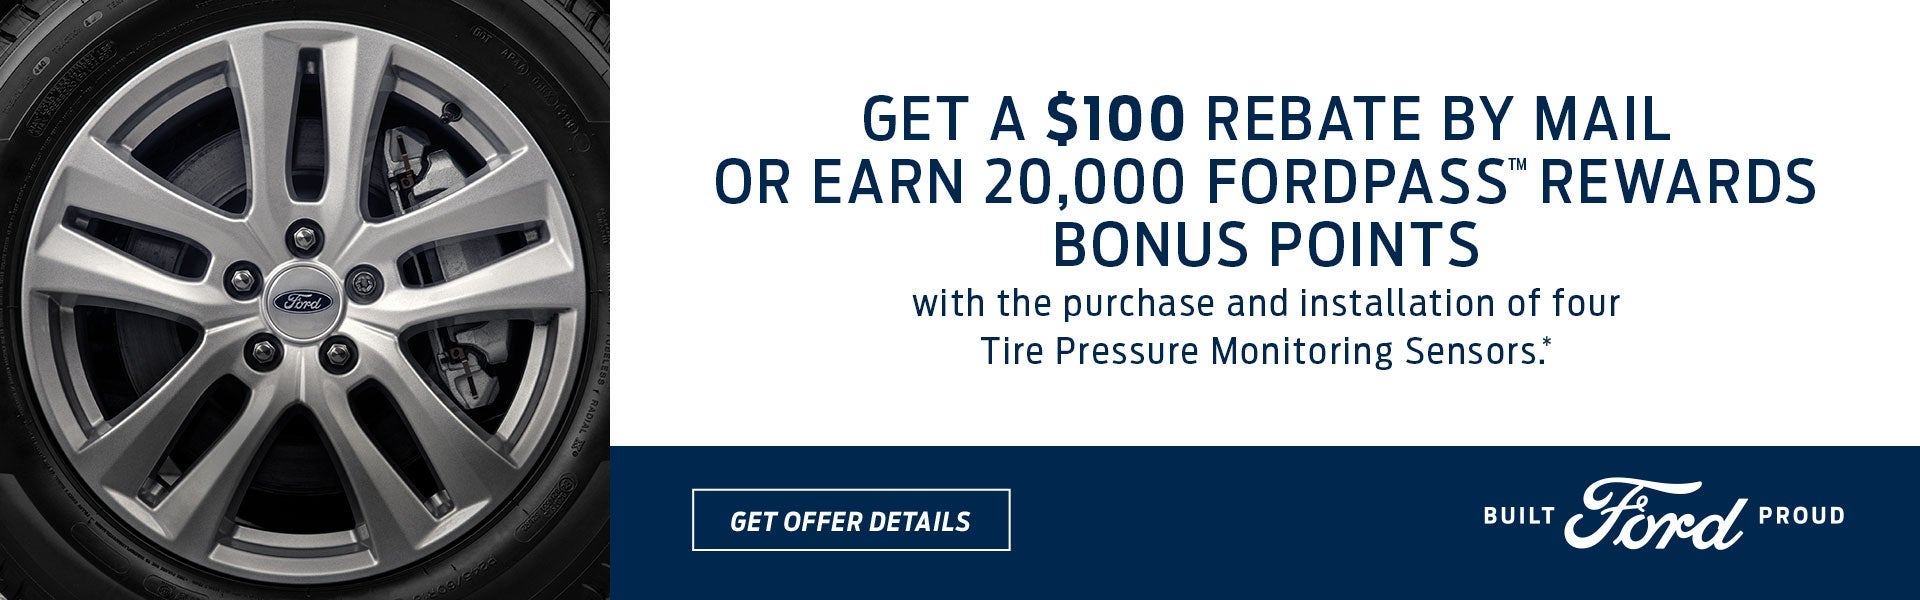 Get $100 Rebate | Sarchione Ford of Randolph in Randolph OH